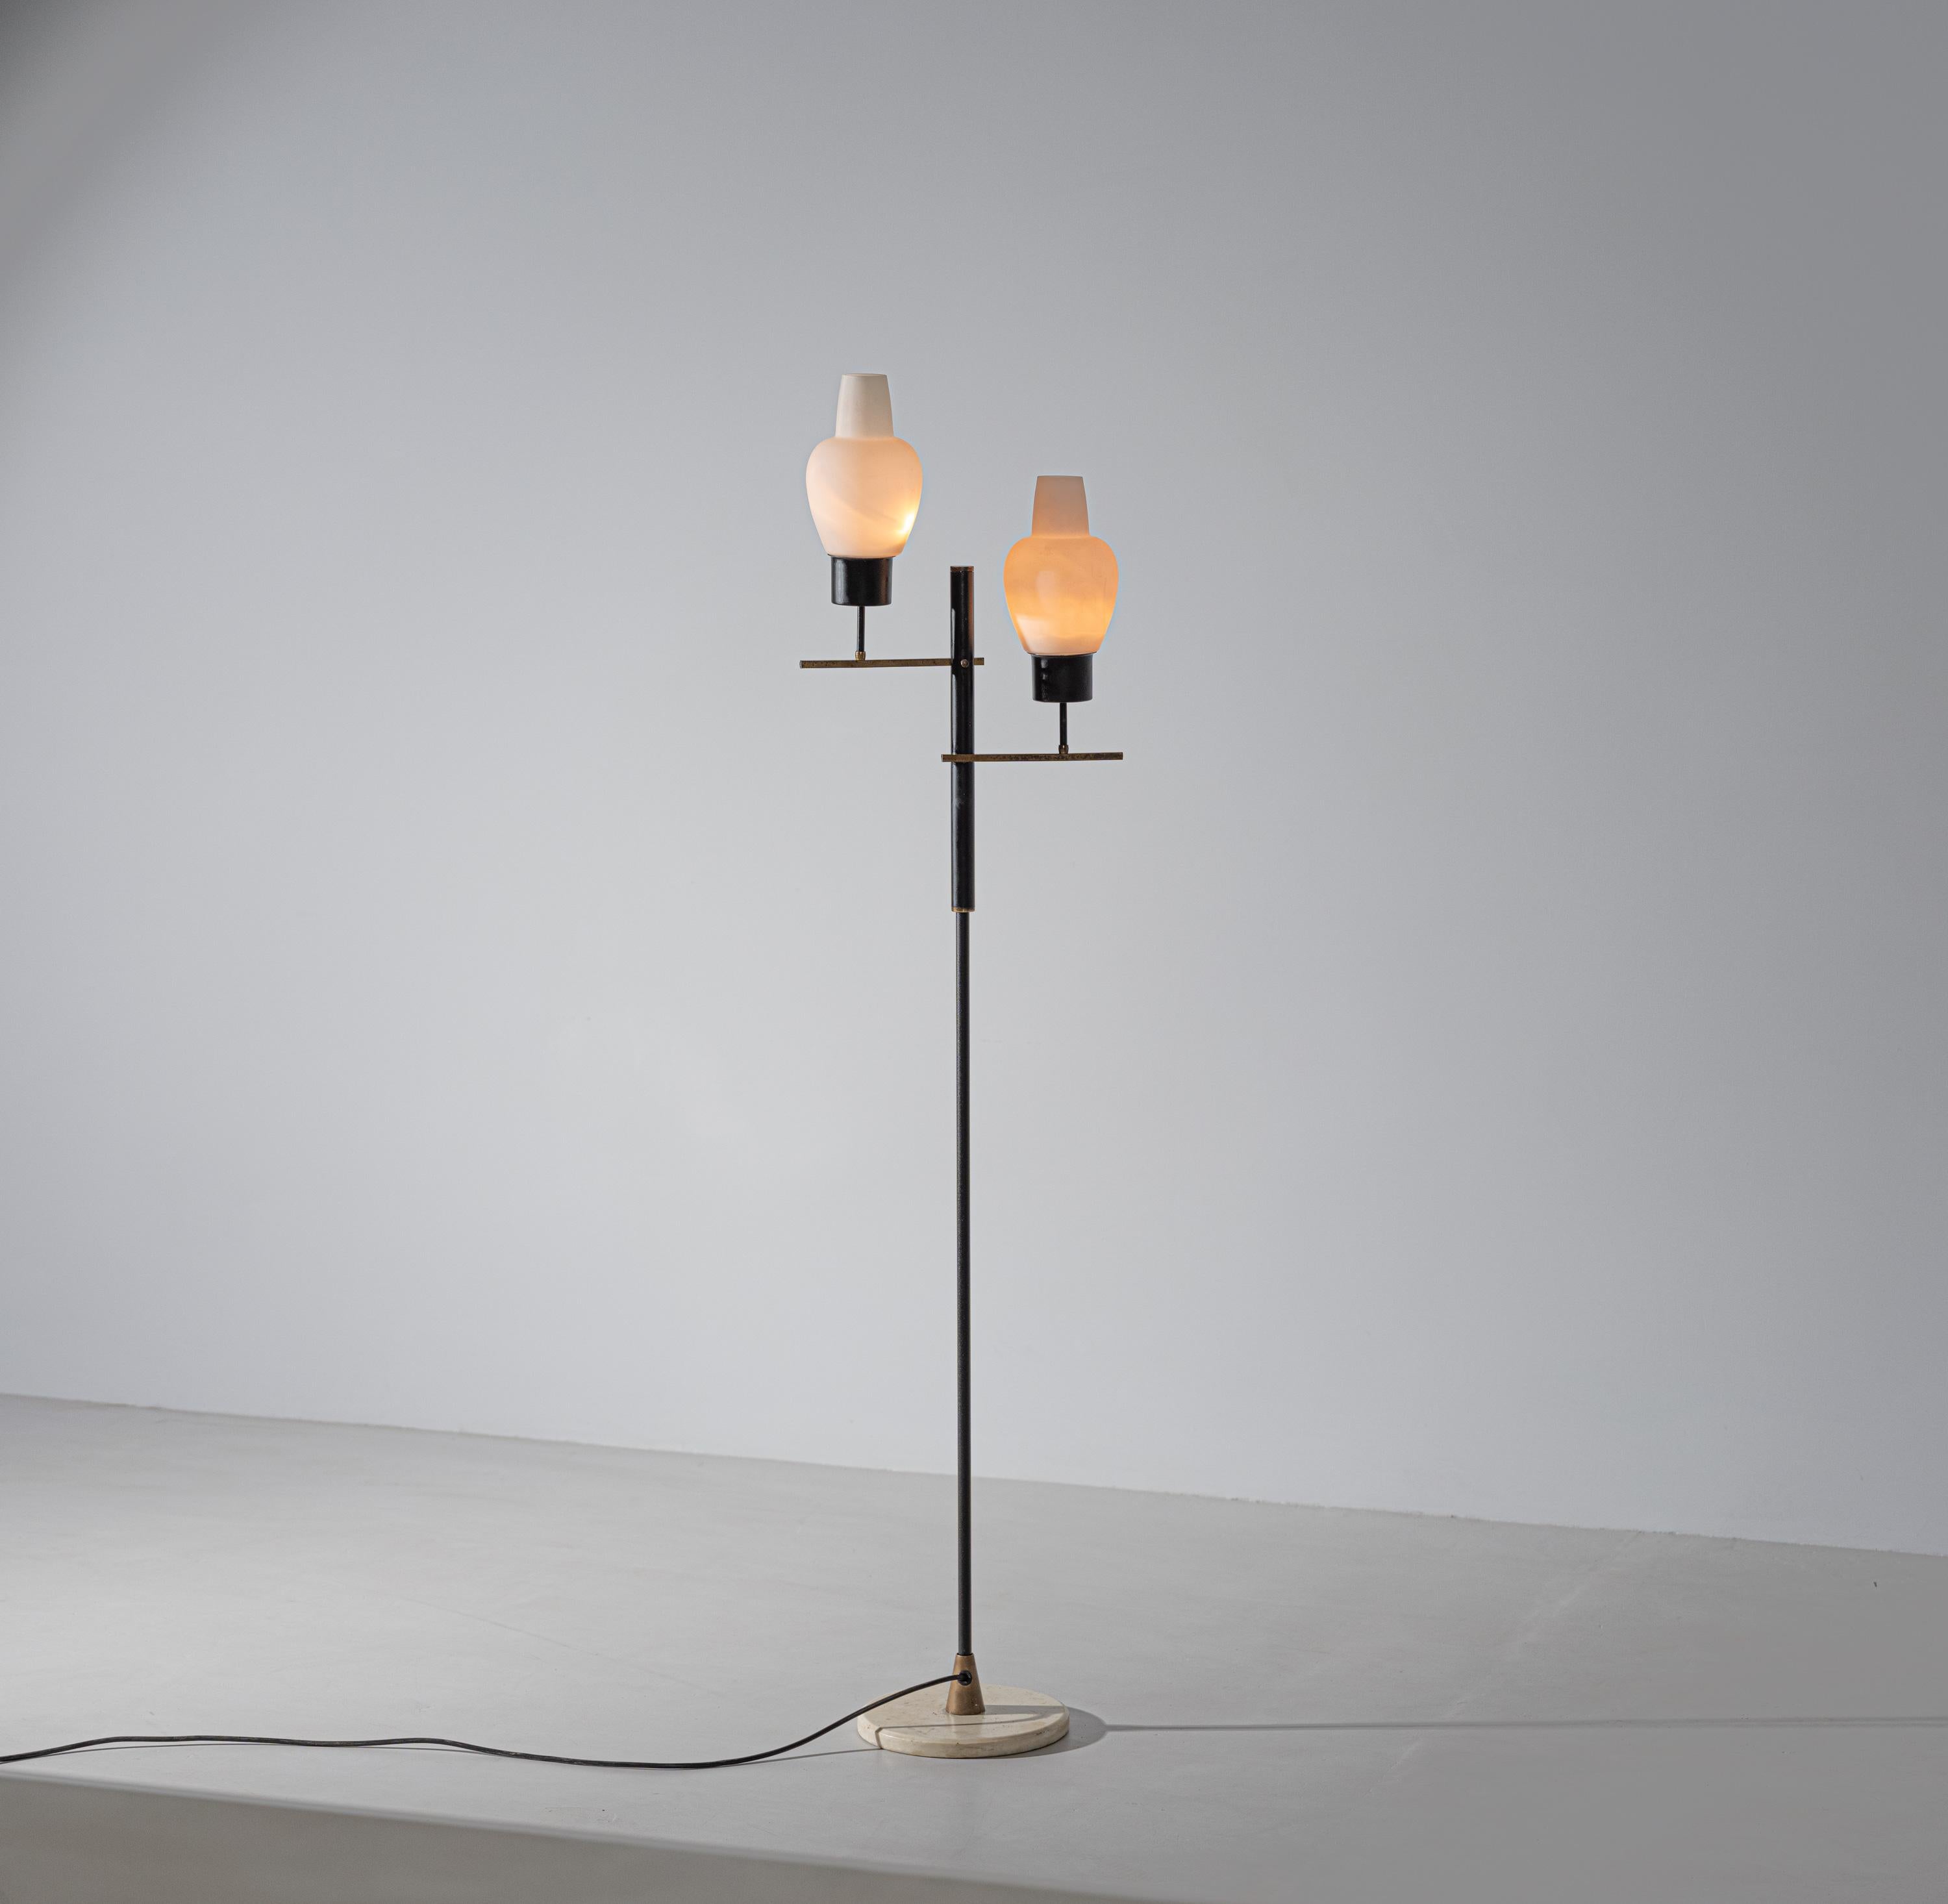 Floor lamp, black lacquered steel, opaline glasses, brass, Italy, 1950s. 

Elegant base lamp of Italian design, produced in the 1950s. Made of iron, brass and opal glass diffusers. 
This floor lamp is in original condition.

2 standard E14